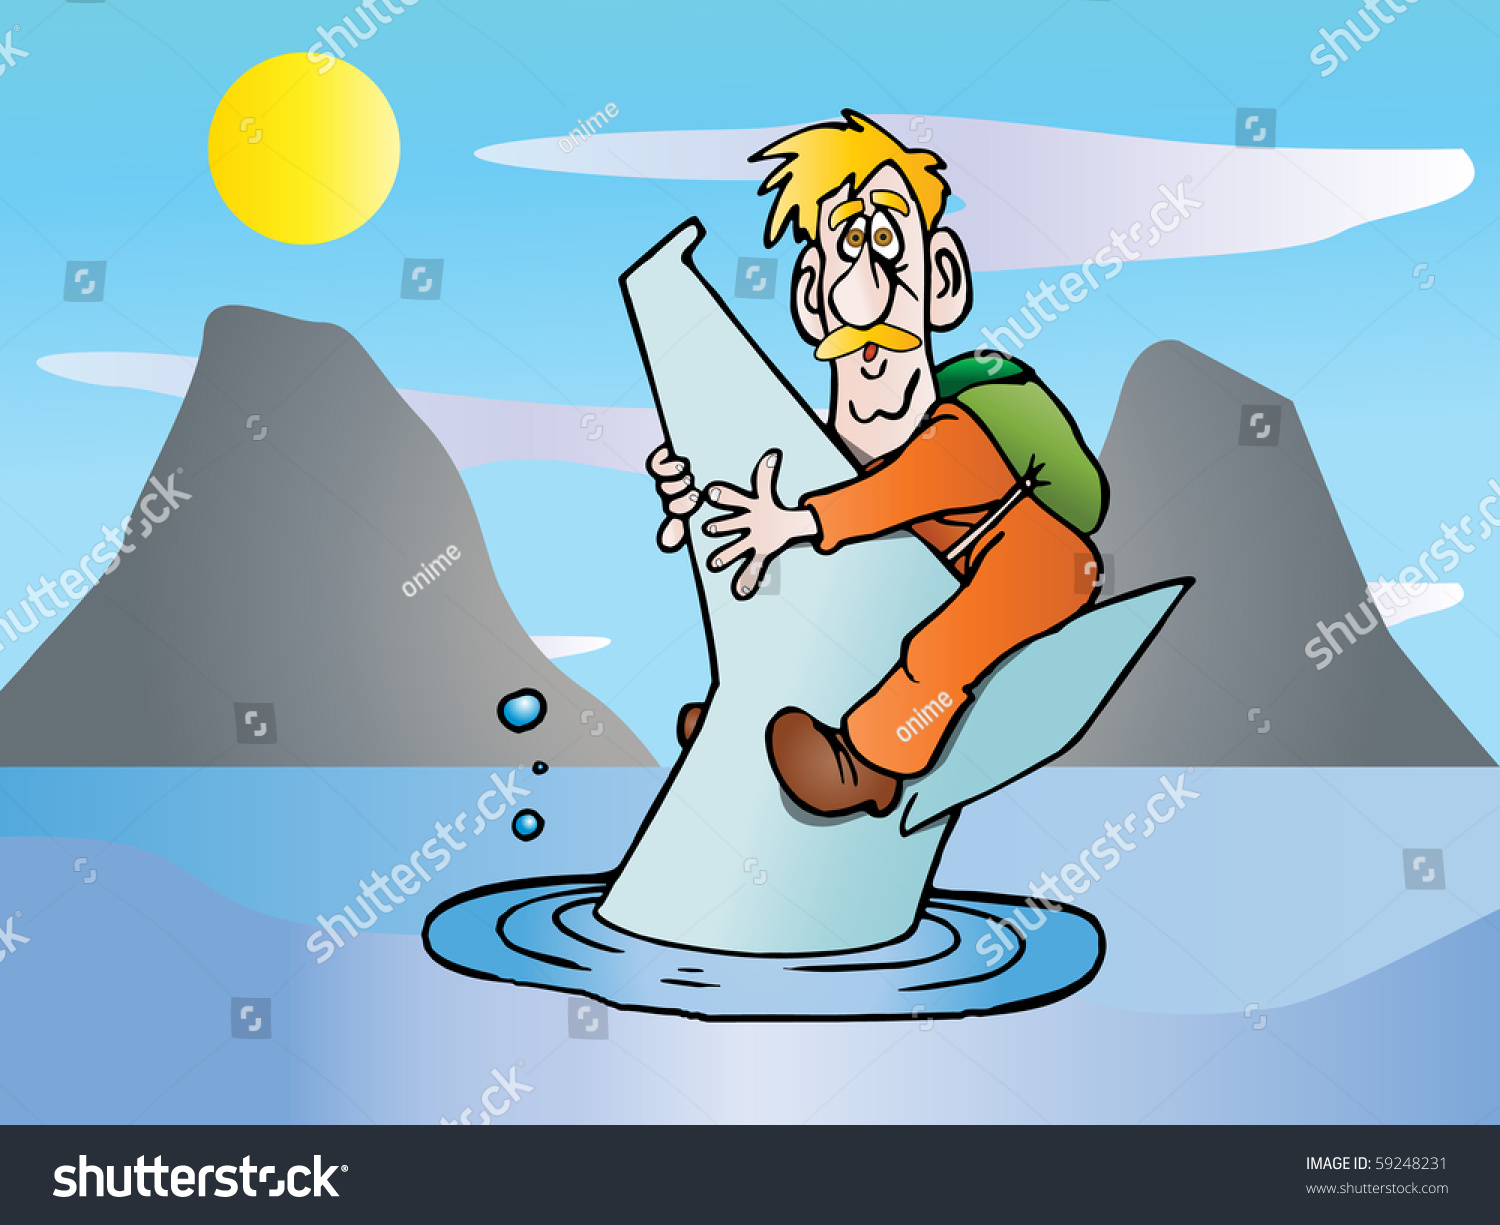 Illustration Of A Man Drowning Reaching Out For Help On Nature ...